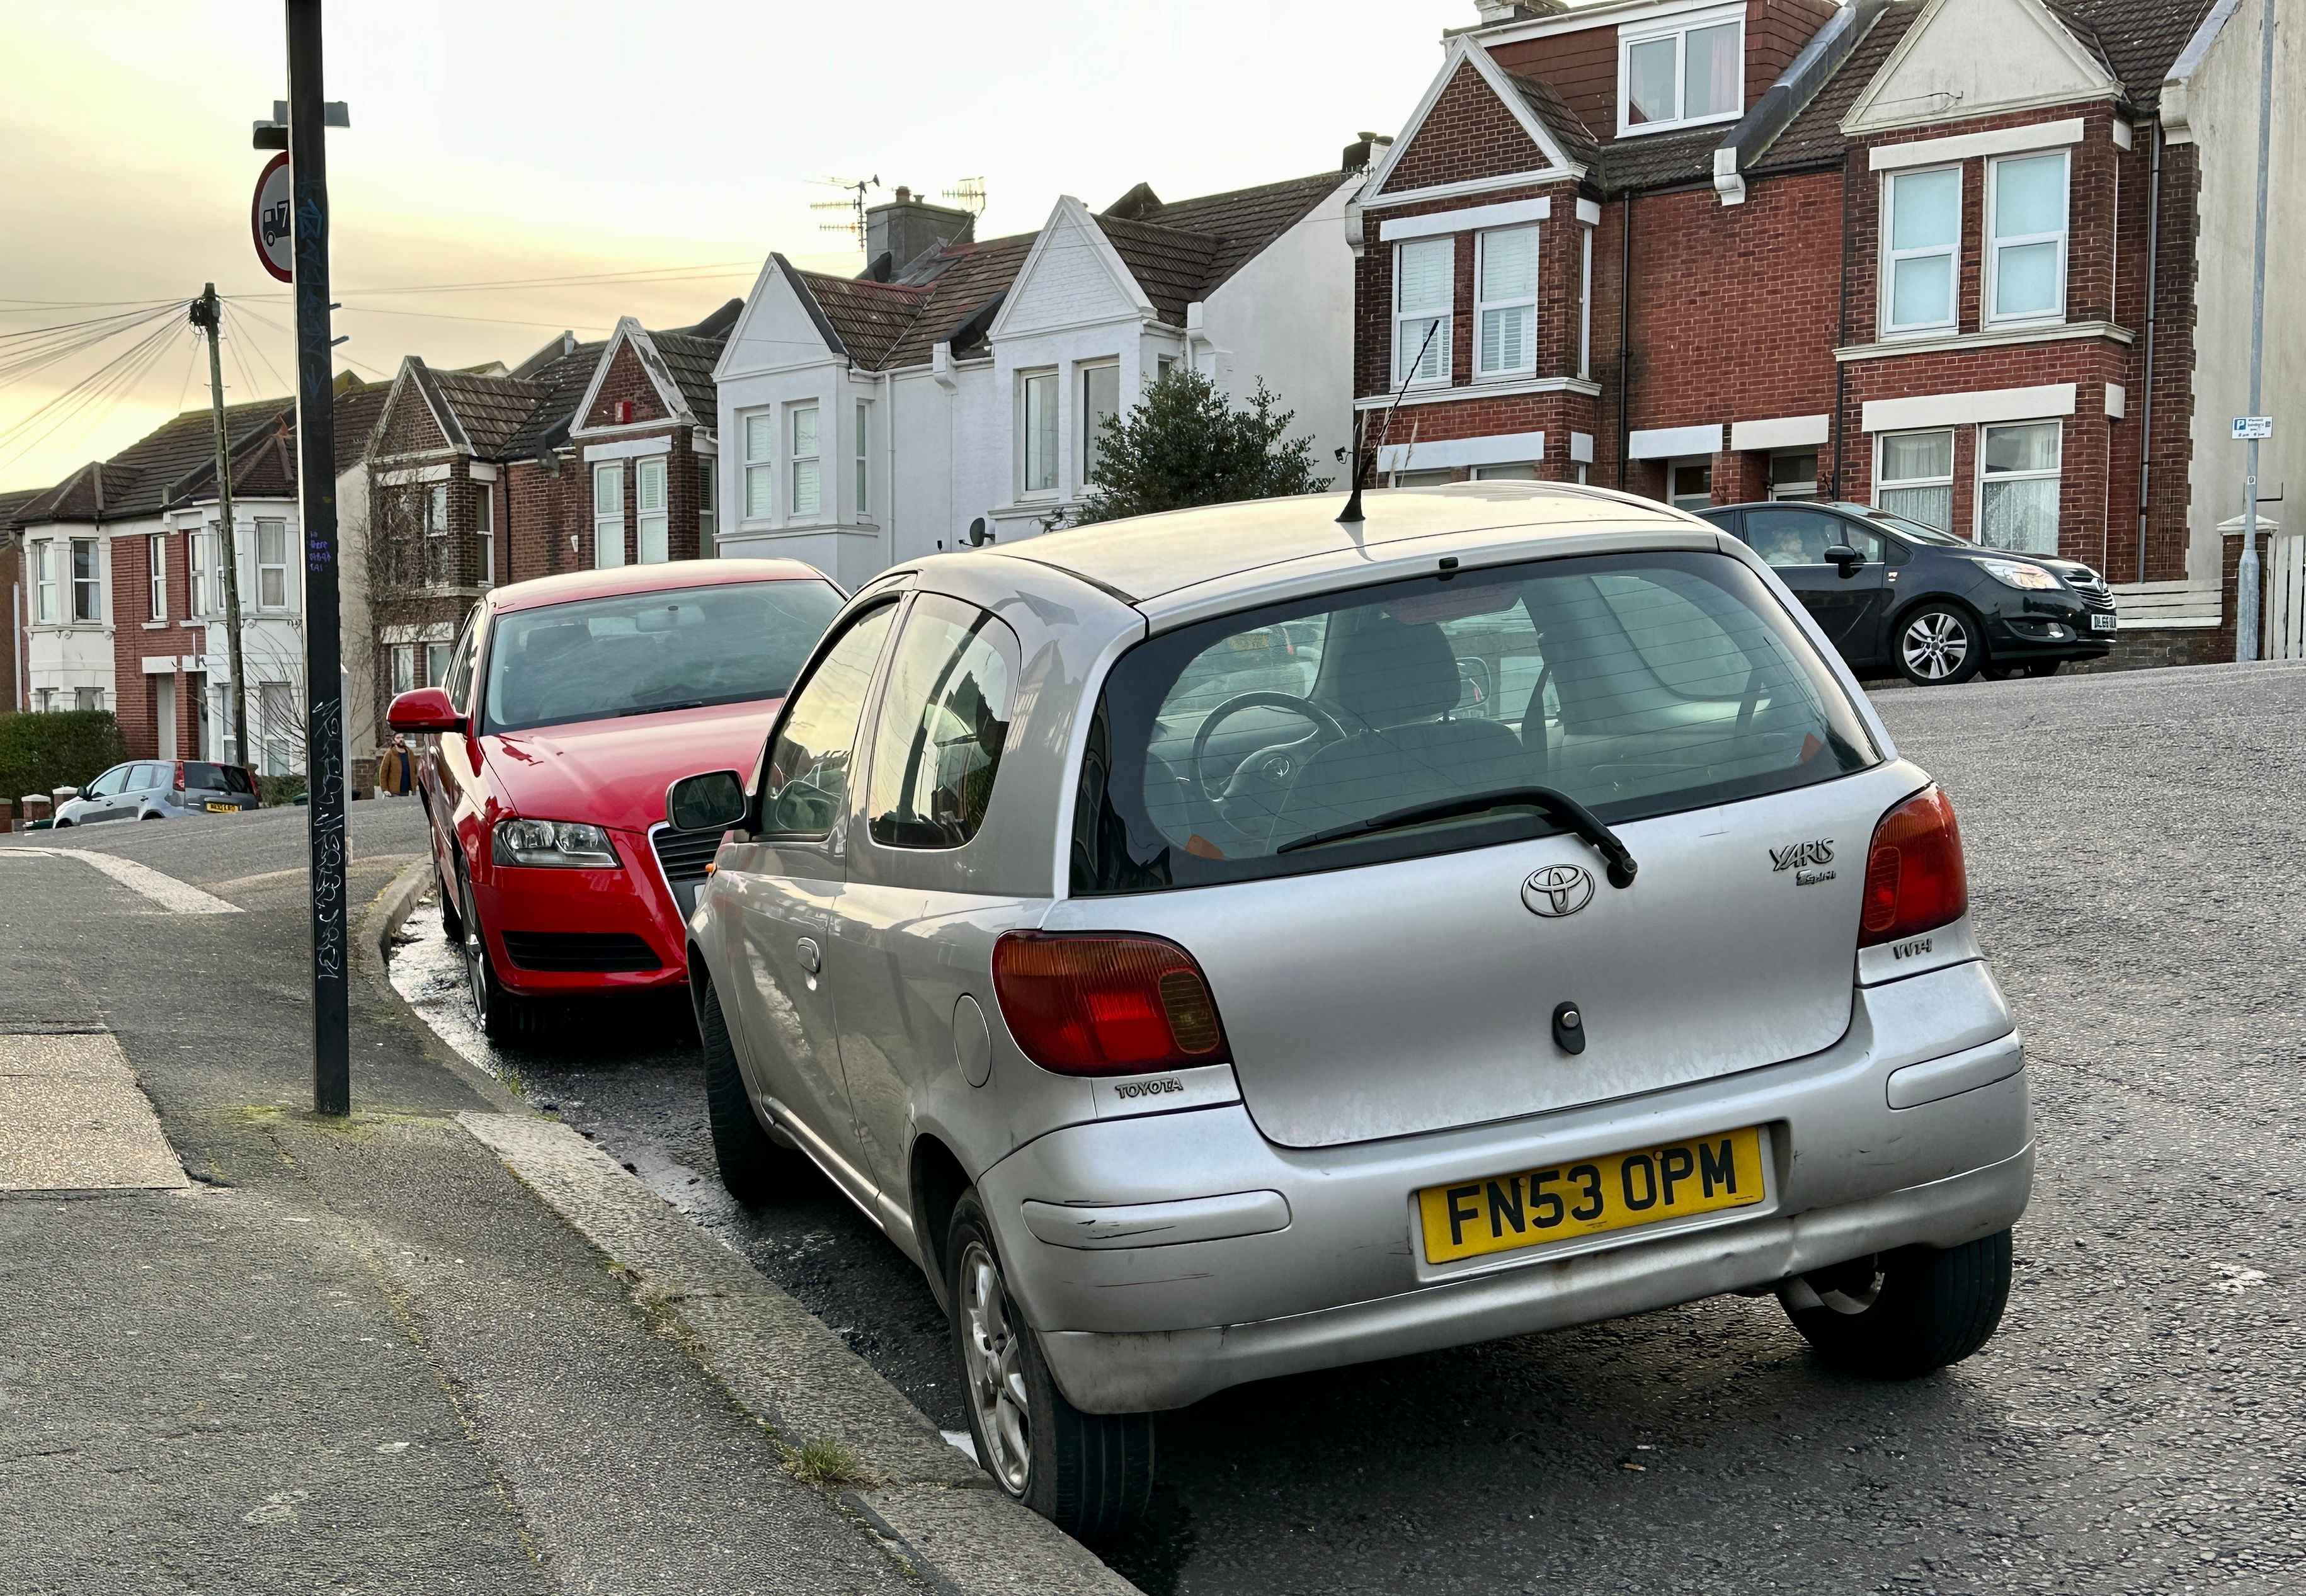 Photograph of FN53 OPM - a Silver Toyota Yaris parked in Hollingdean by a non-resident. The fifth of five photographs supplied by the residents of Hollingdean.